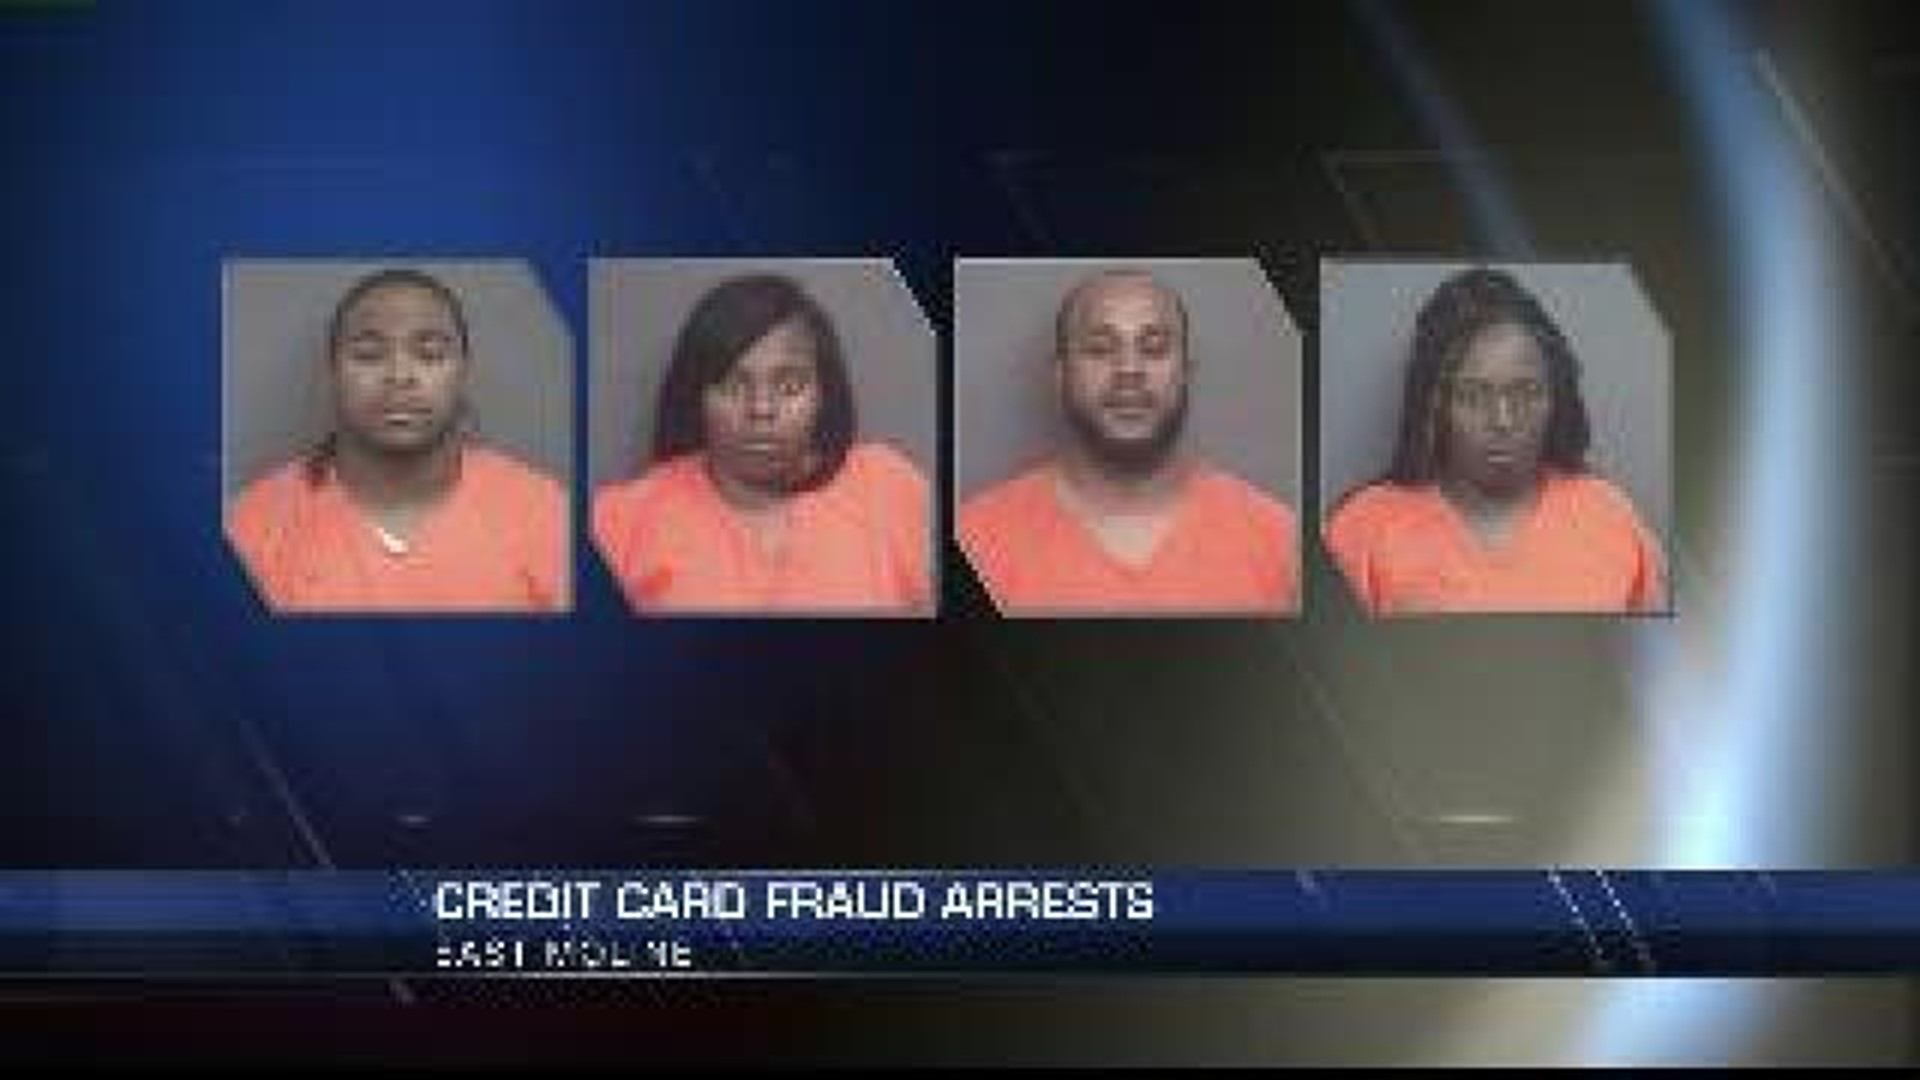 Four arrested in connection with fraudulent credit card scheme